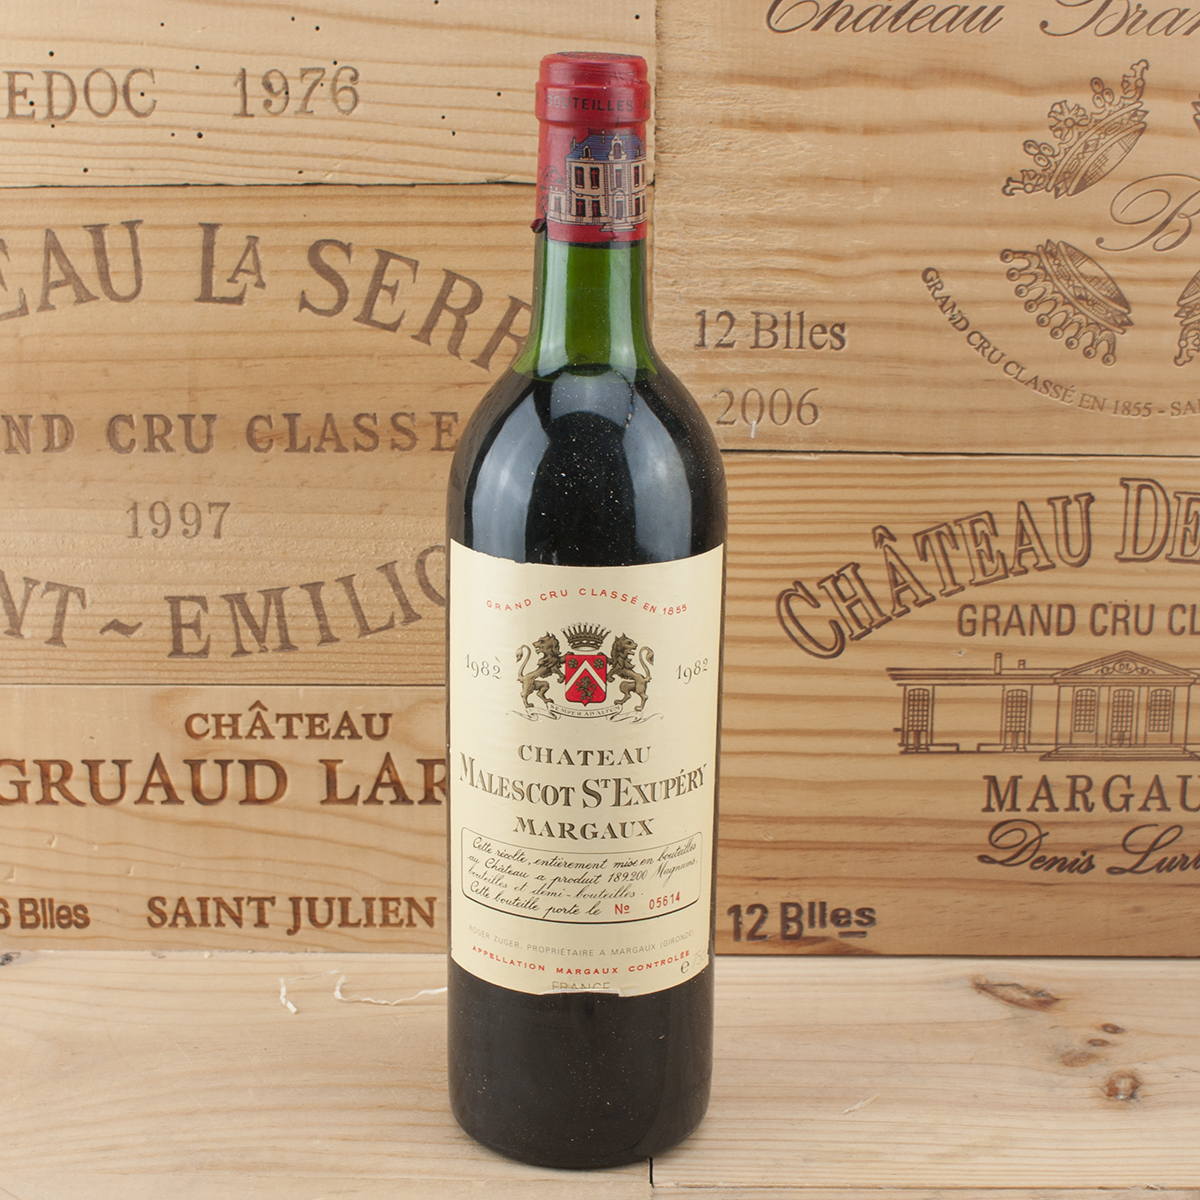 1982 Chateau Malescot St. Exupery